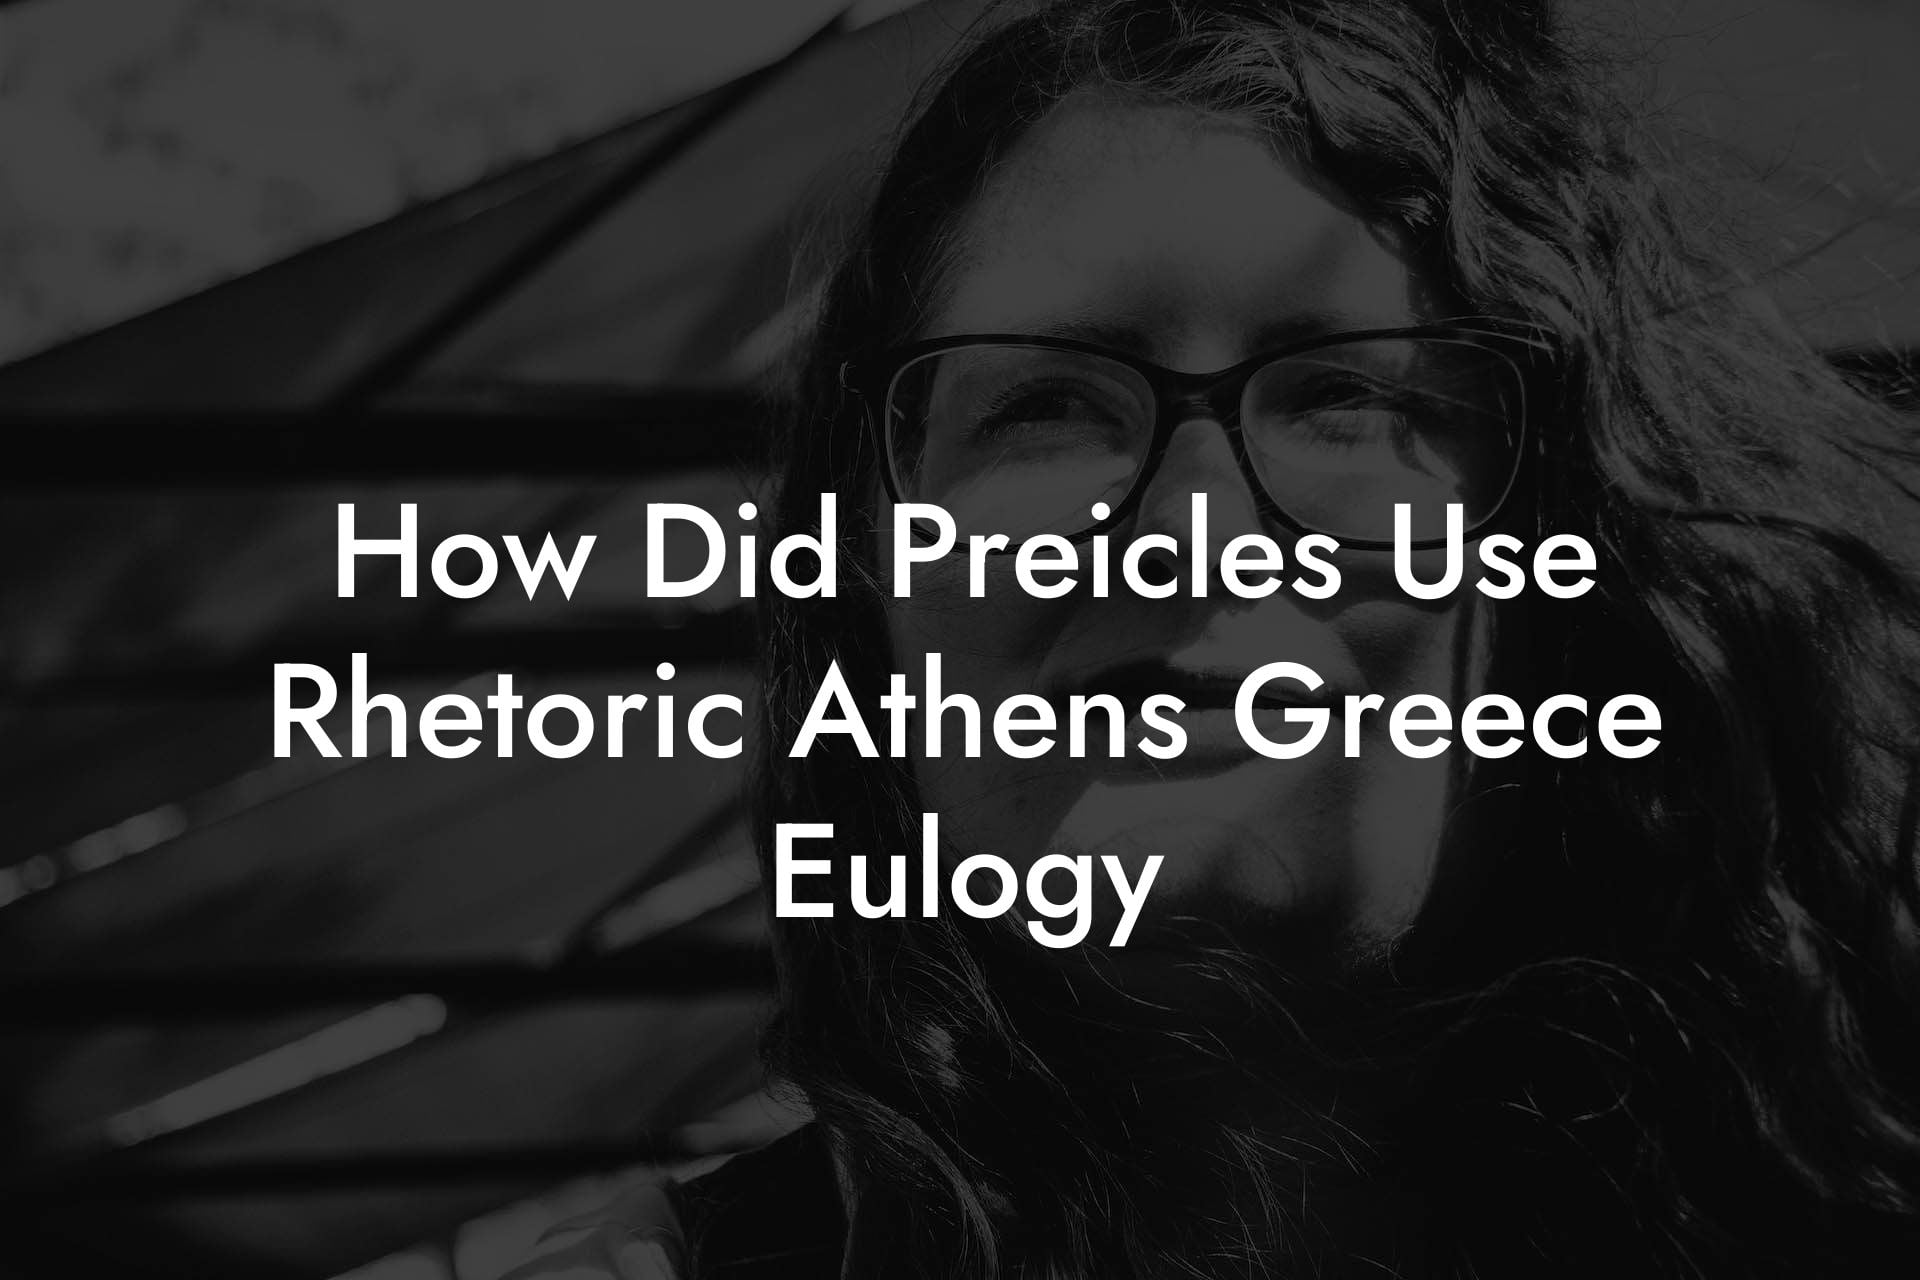 How Did Preicles Use Rhetoric Athens Greece Eulogy